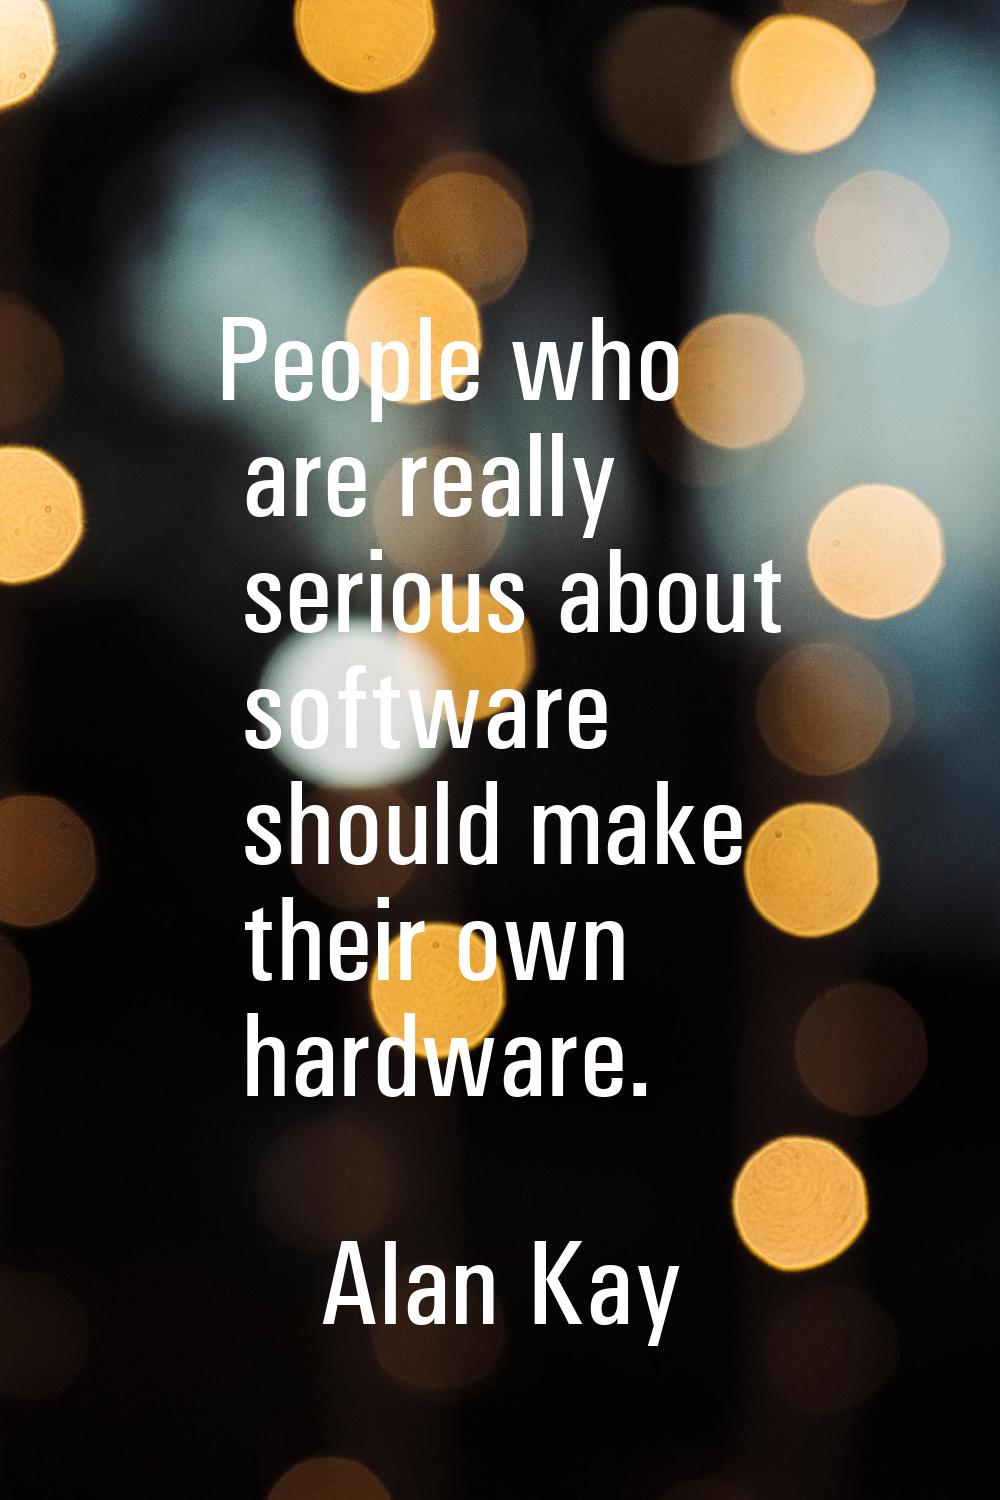 People who are really serious about software should make their own hardware.